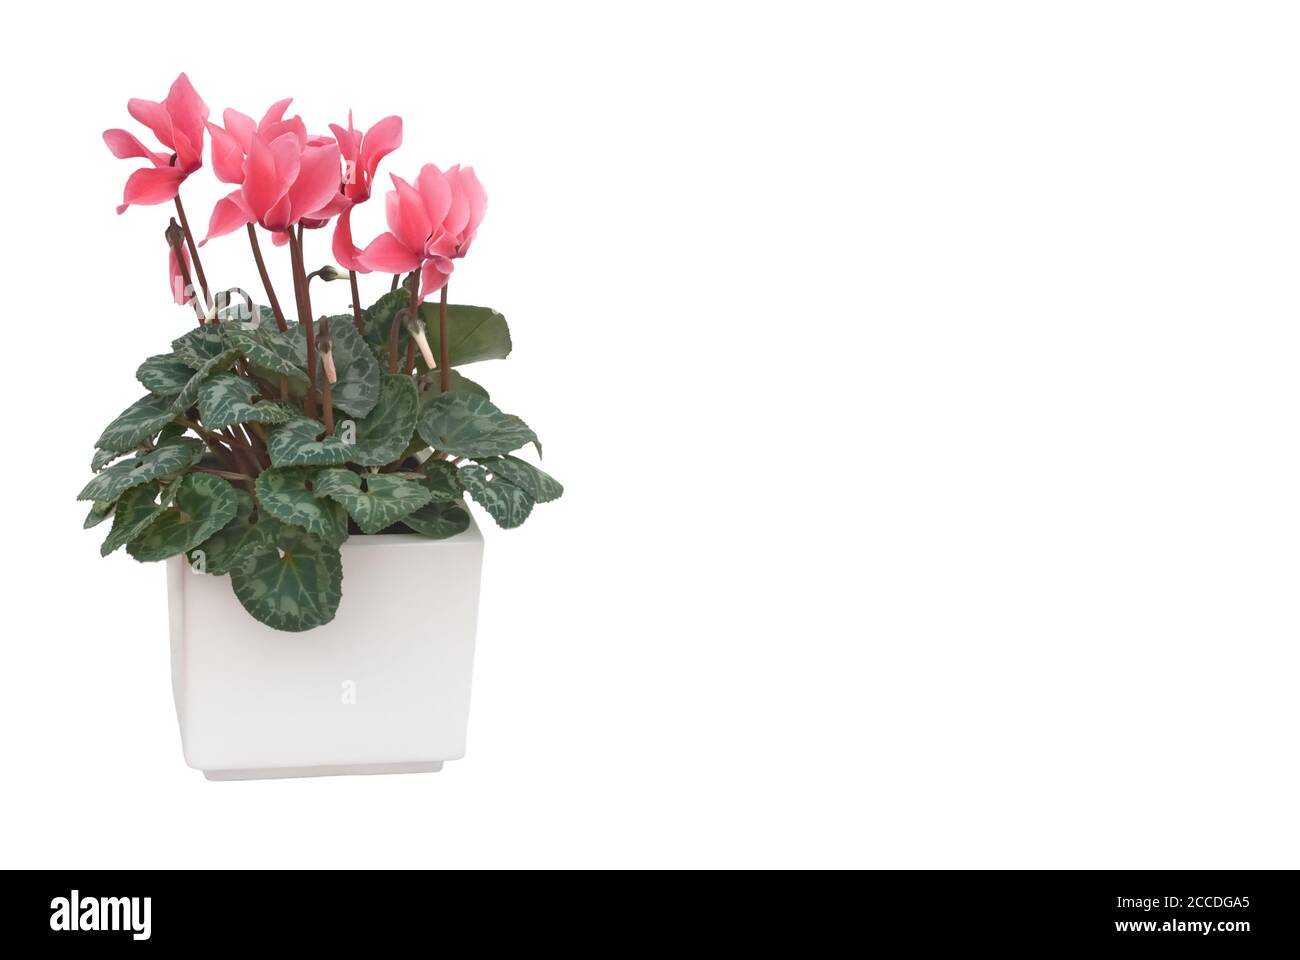 Cyclamen in a flower pot against a white background Stock Photo